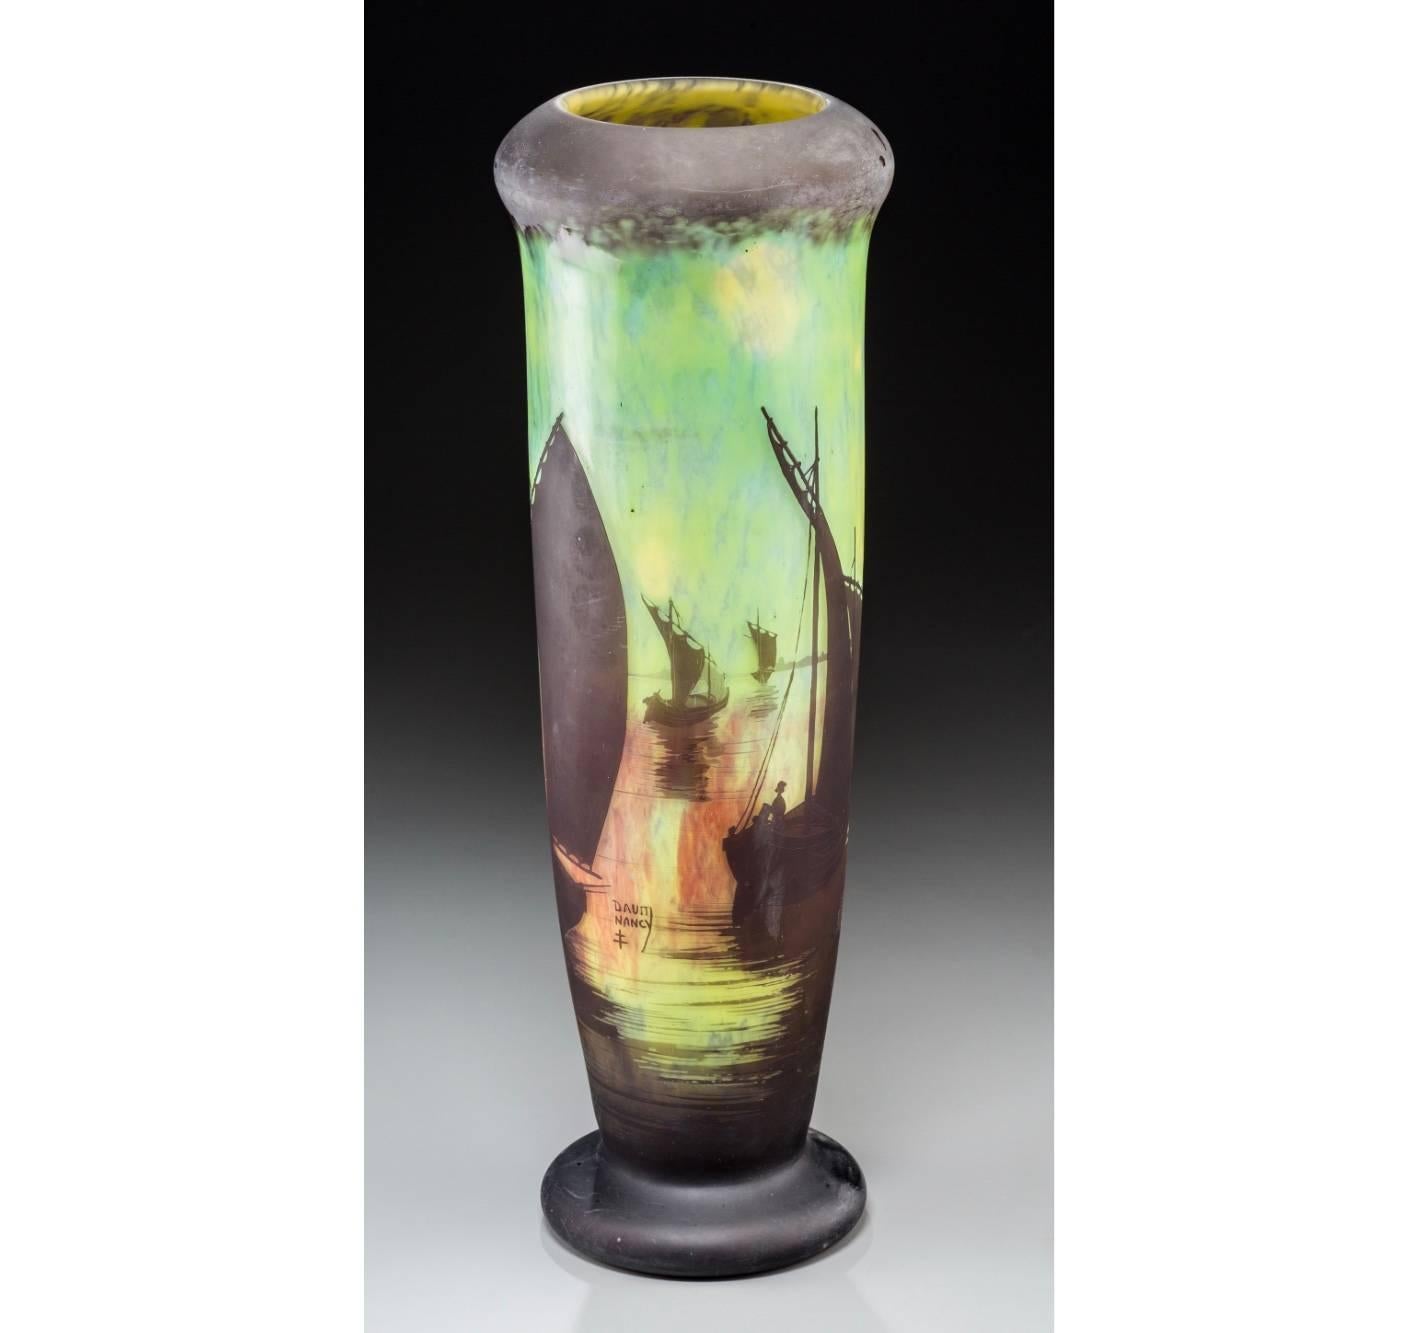 An enormous Daum Nancy acid etched, cameo overlaid glass vase with a serene scenic of French fisherman with lateen sail boats cameo etched in browns, green, yellow, orange and red, (7 sailboats)

Circa 1900. 

Signed in Cameo: DAUM NANCY with Cross